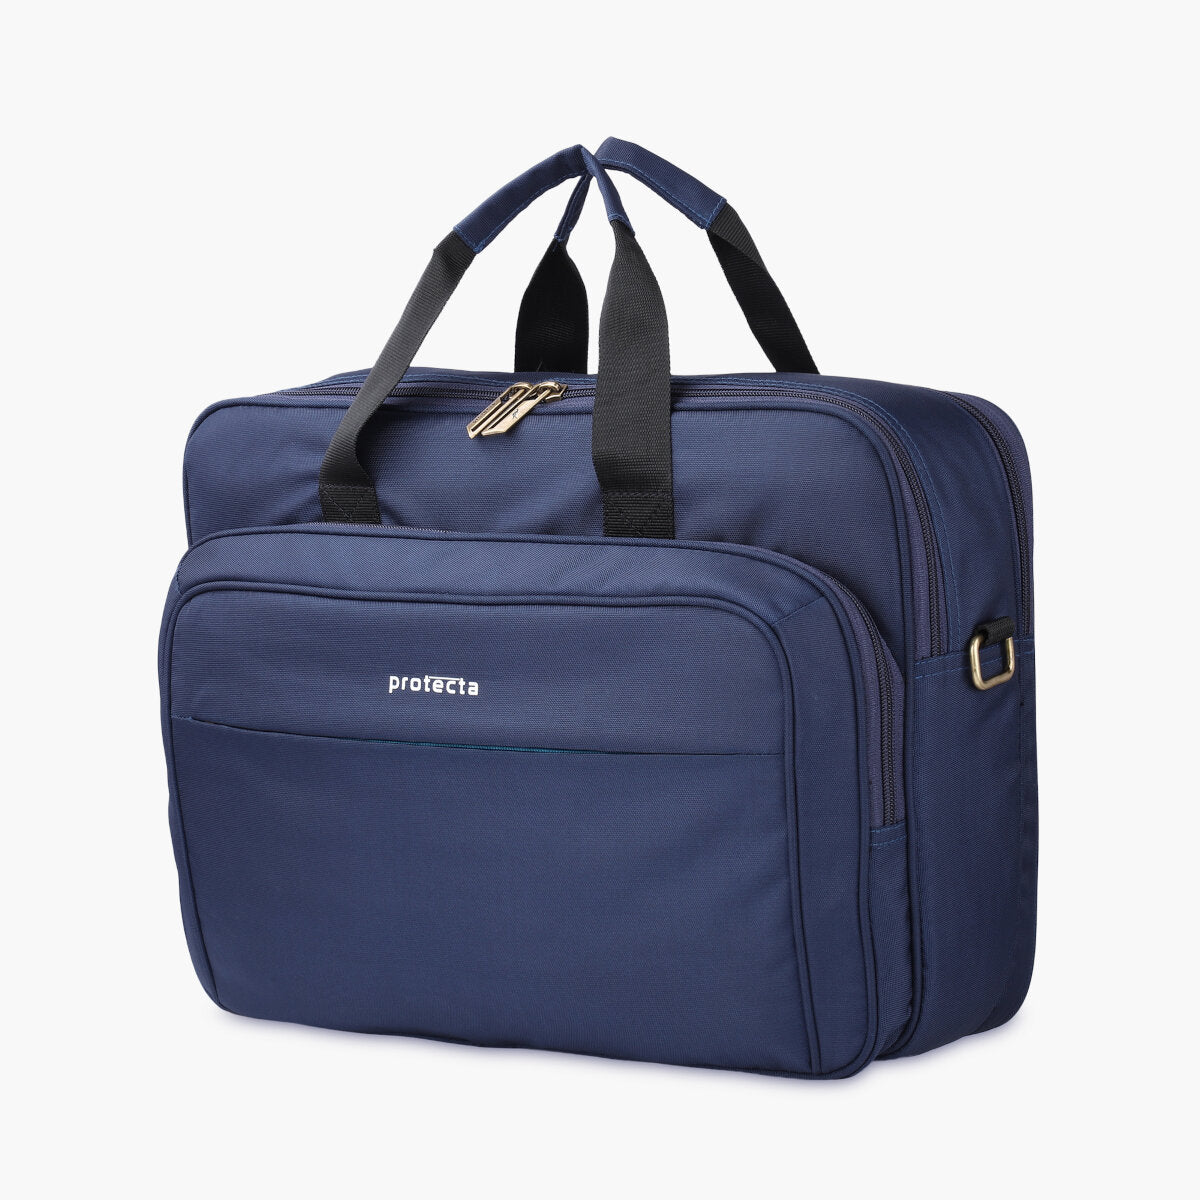 Navy-Blue, Protecta Staunch Ally Travel & Offfice Laptop Bag-2